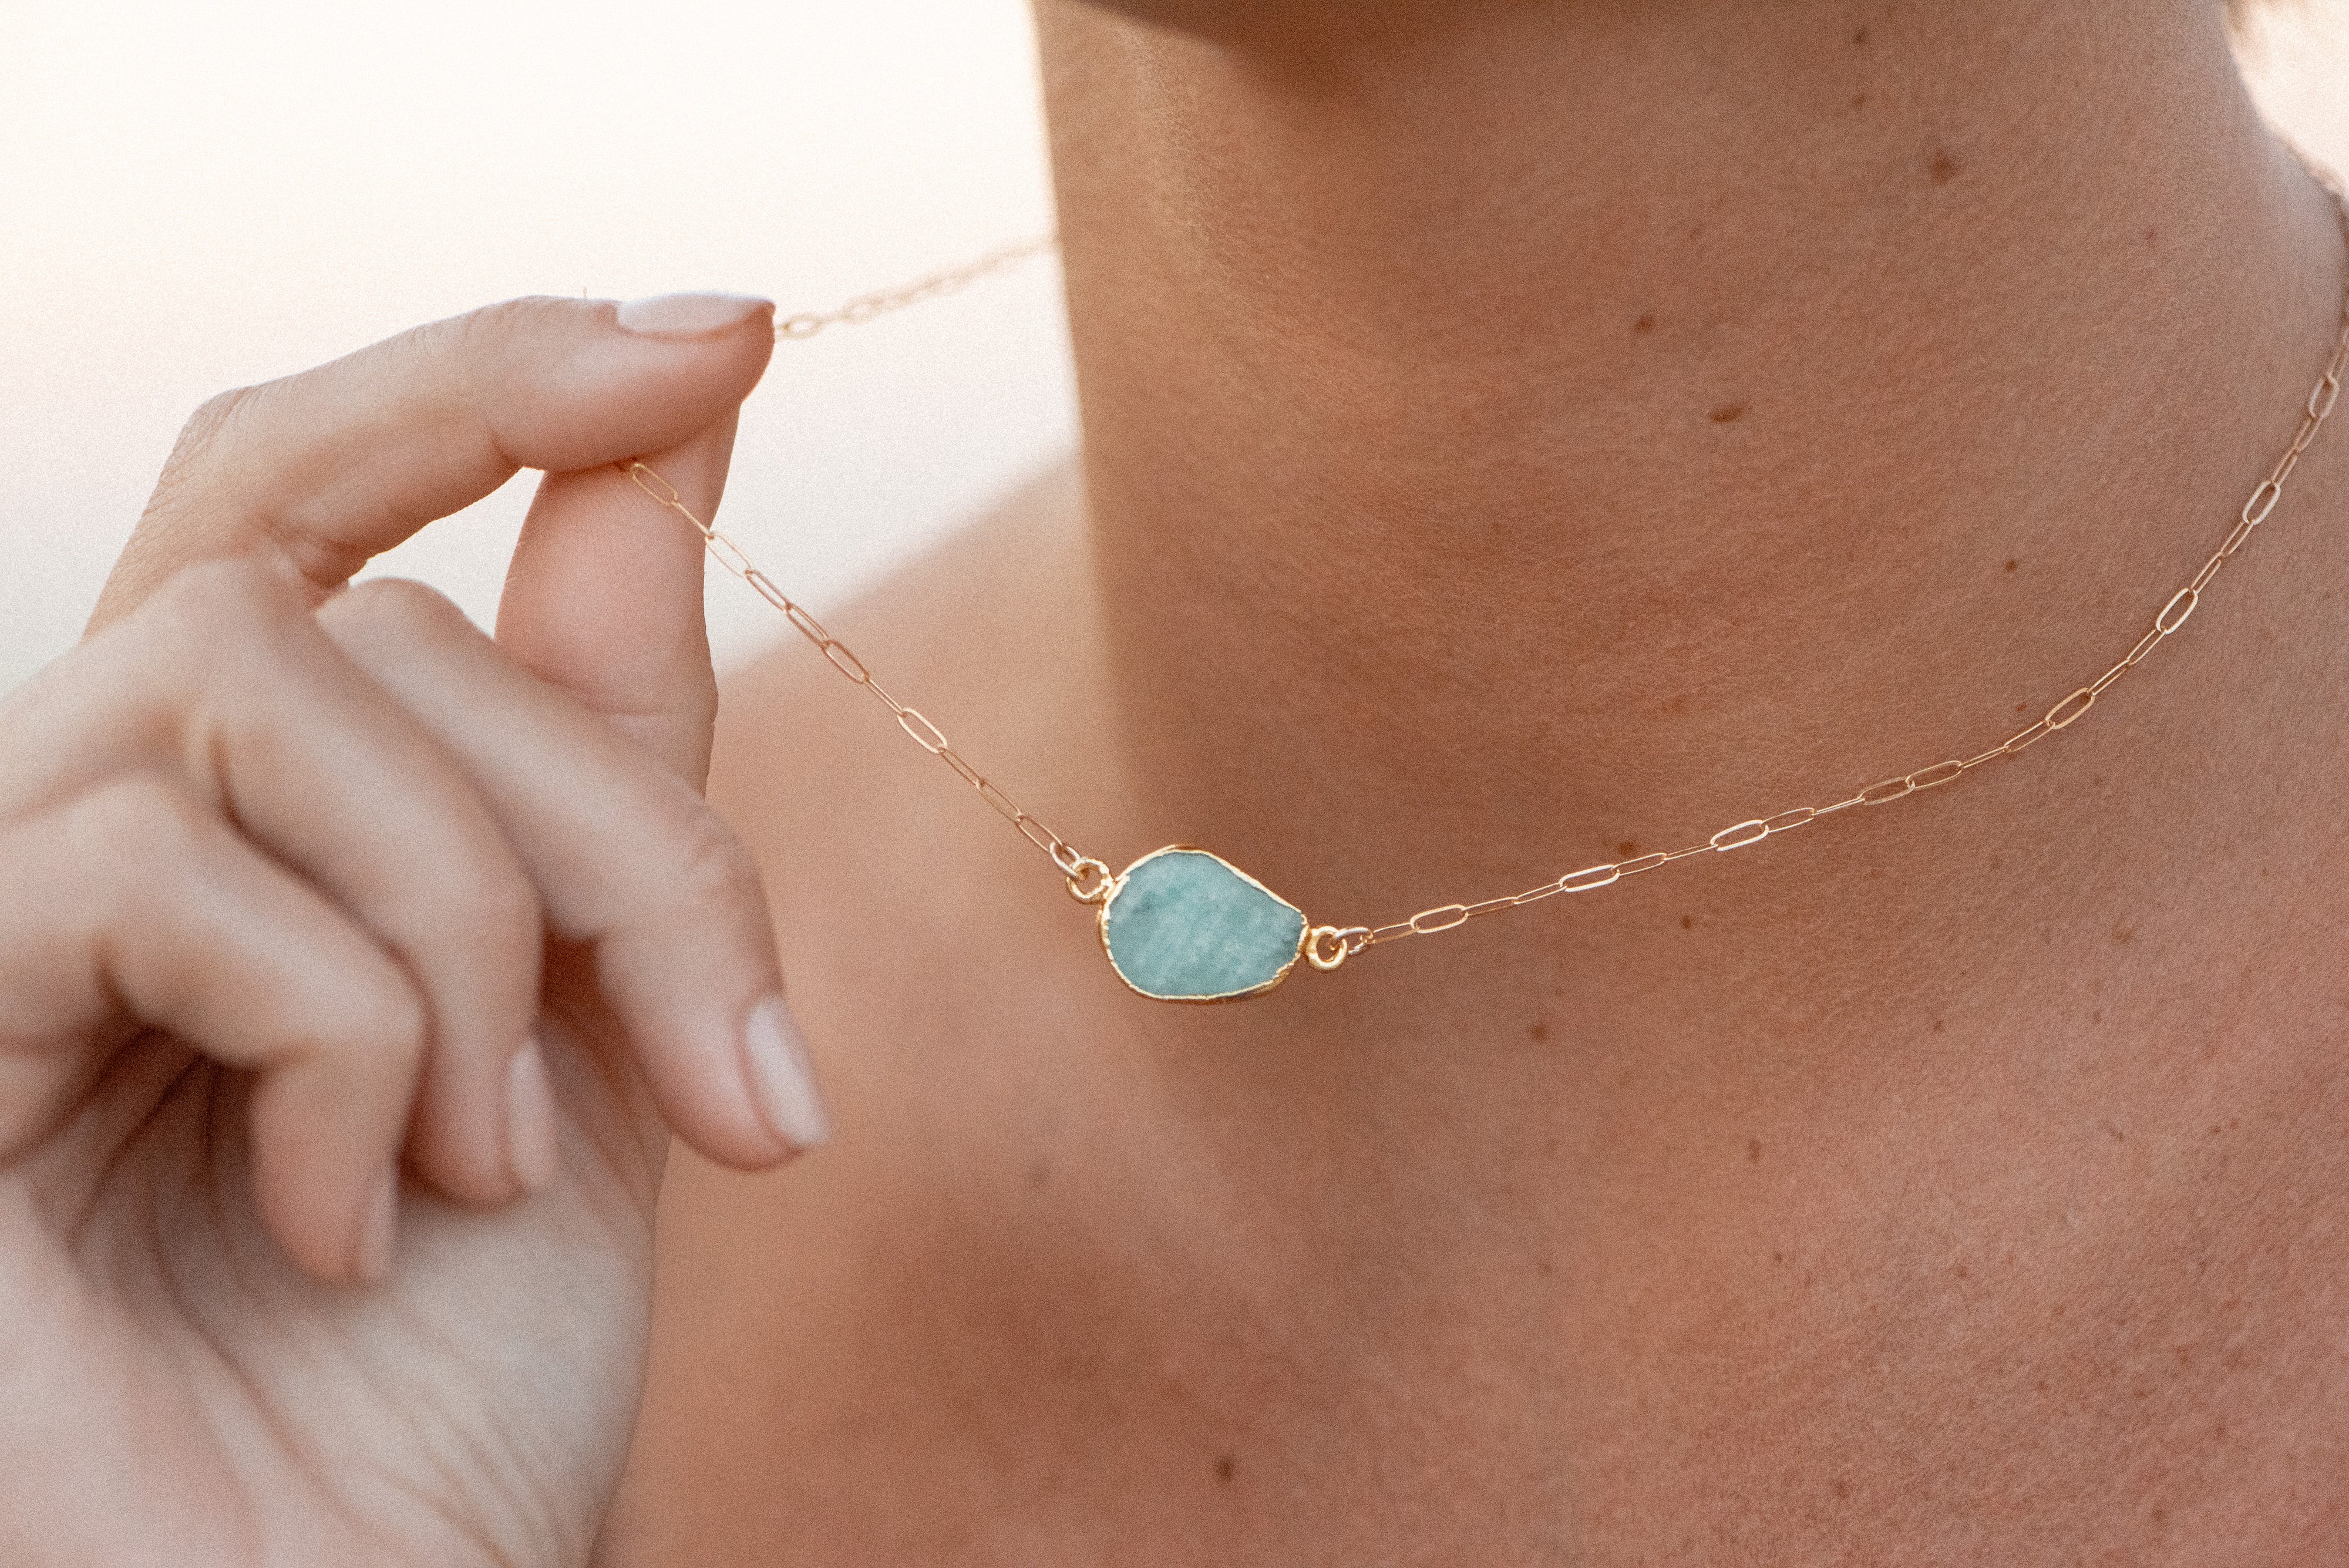 The Green Amazonite nugget necklace